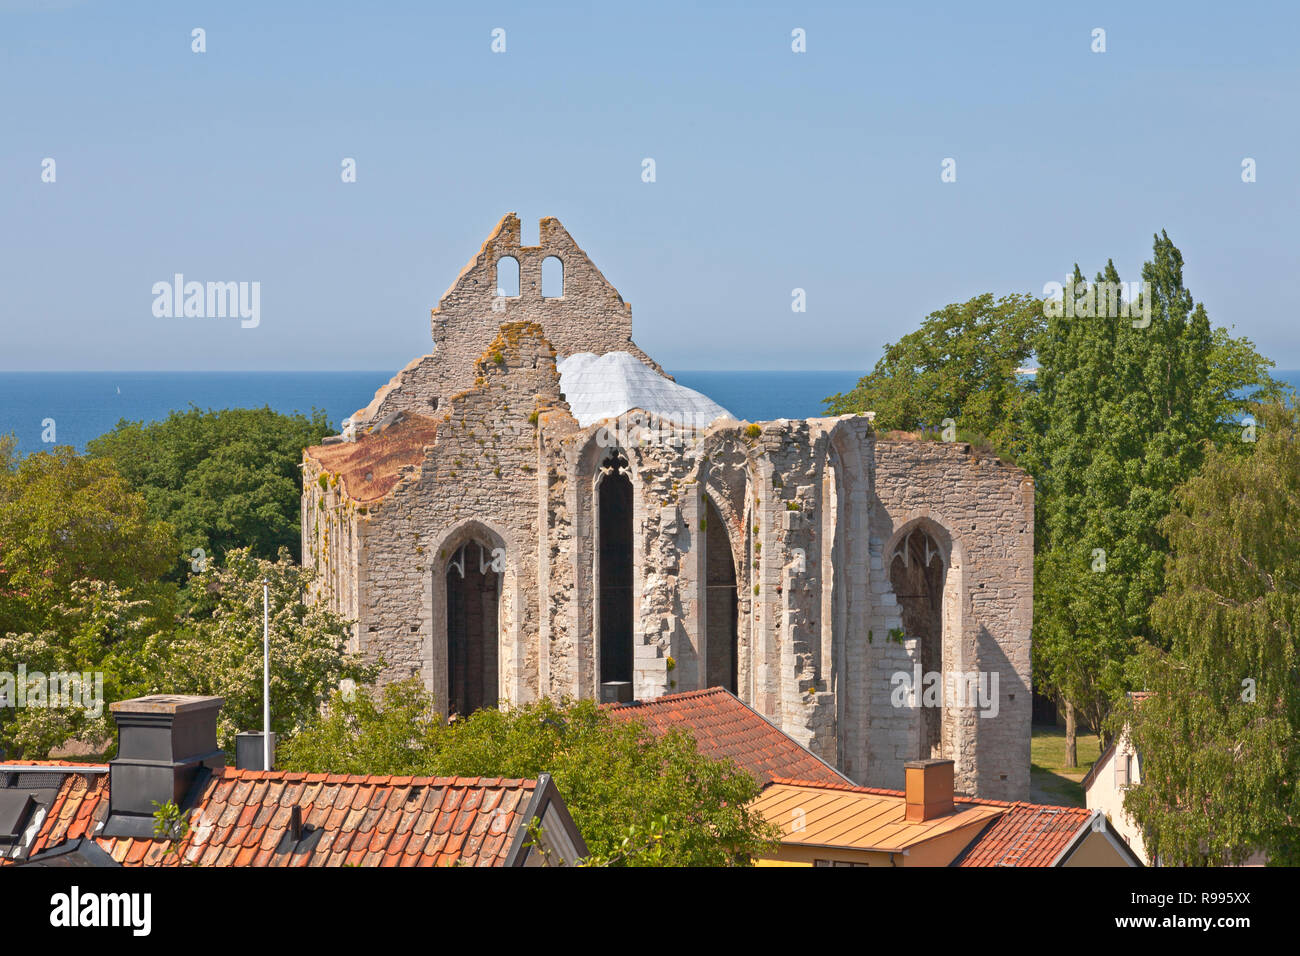 Ruins of Sankt Nicolaus Church, Saint Nicholas Church, on a summer day in the medieval city Visby on the Swedish island Gotland in the Baltic Sea Stock Photo